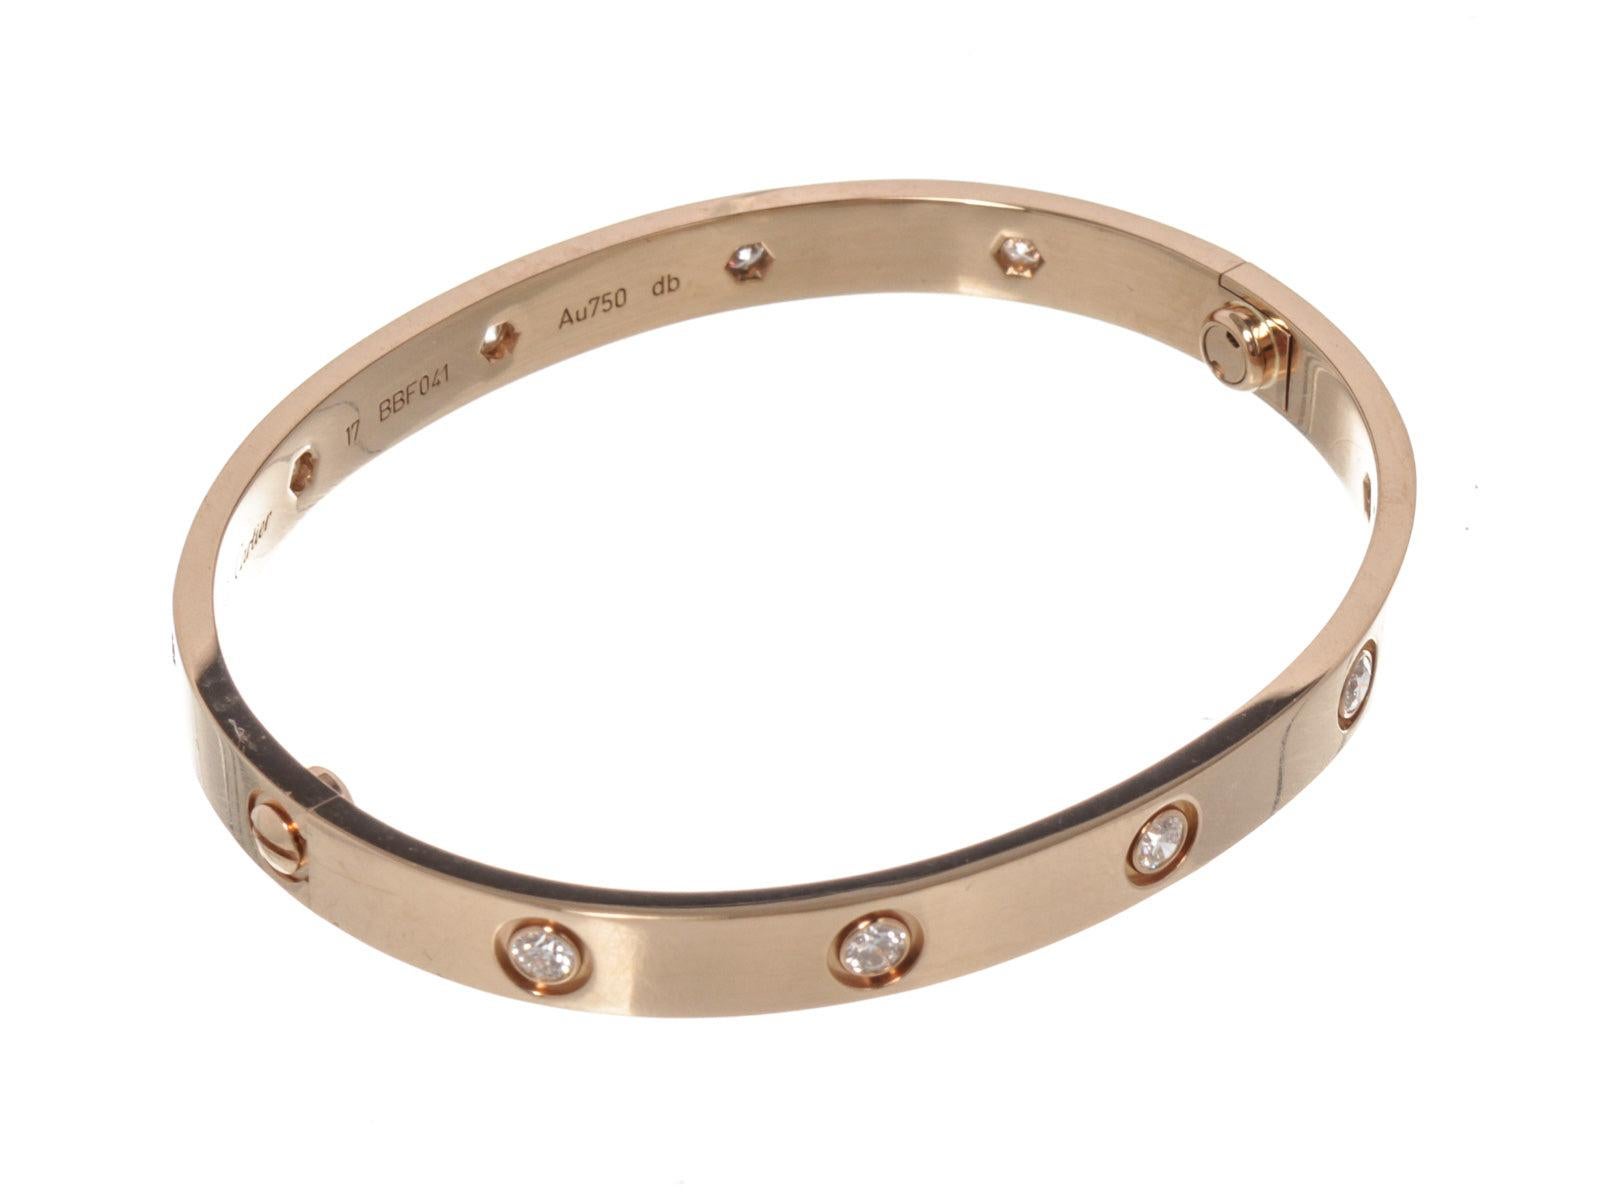 Cartier Rose Gold Love Bracelet In Good Condition For Sale In Irvine, CA